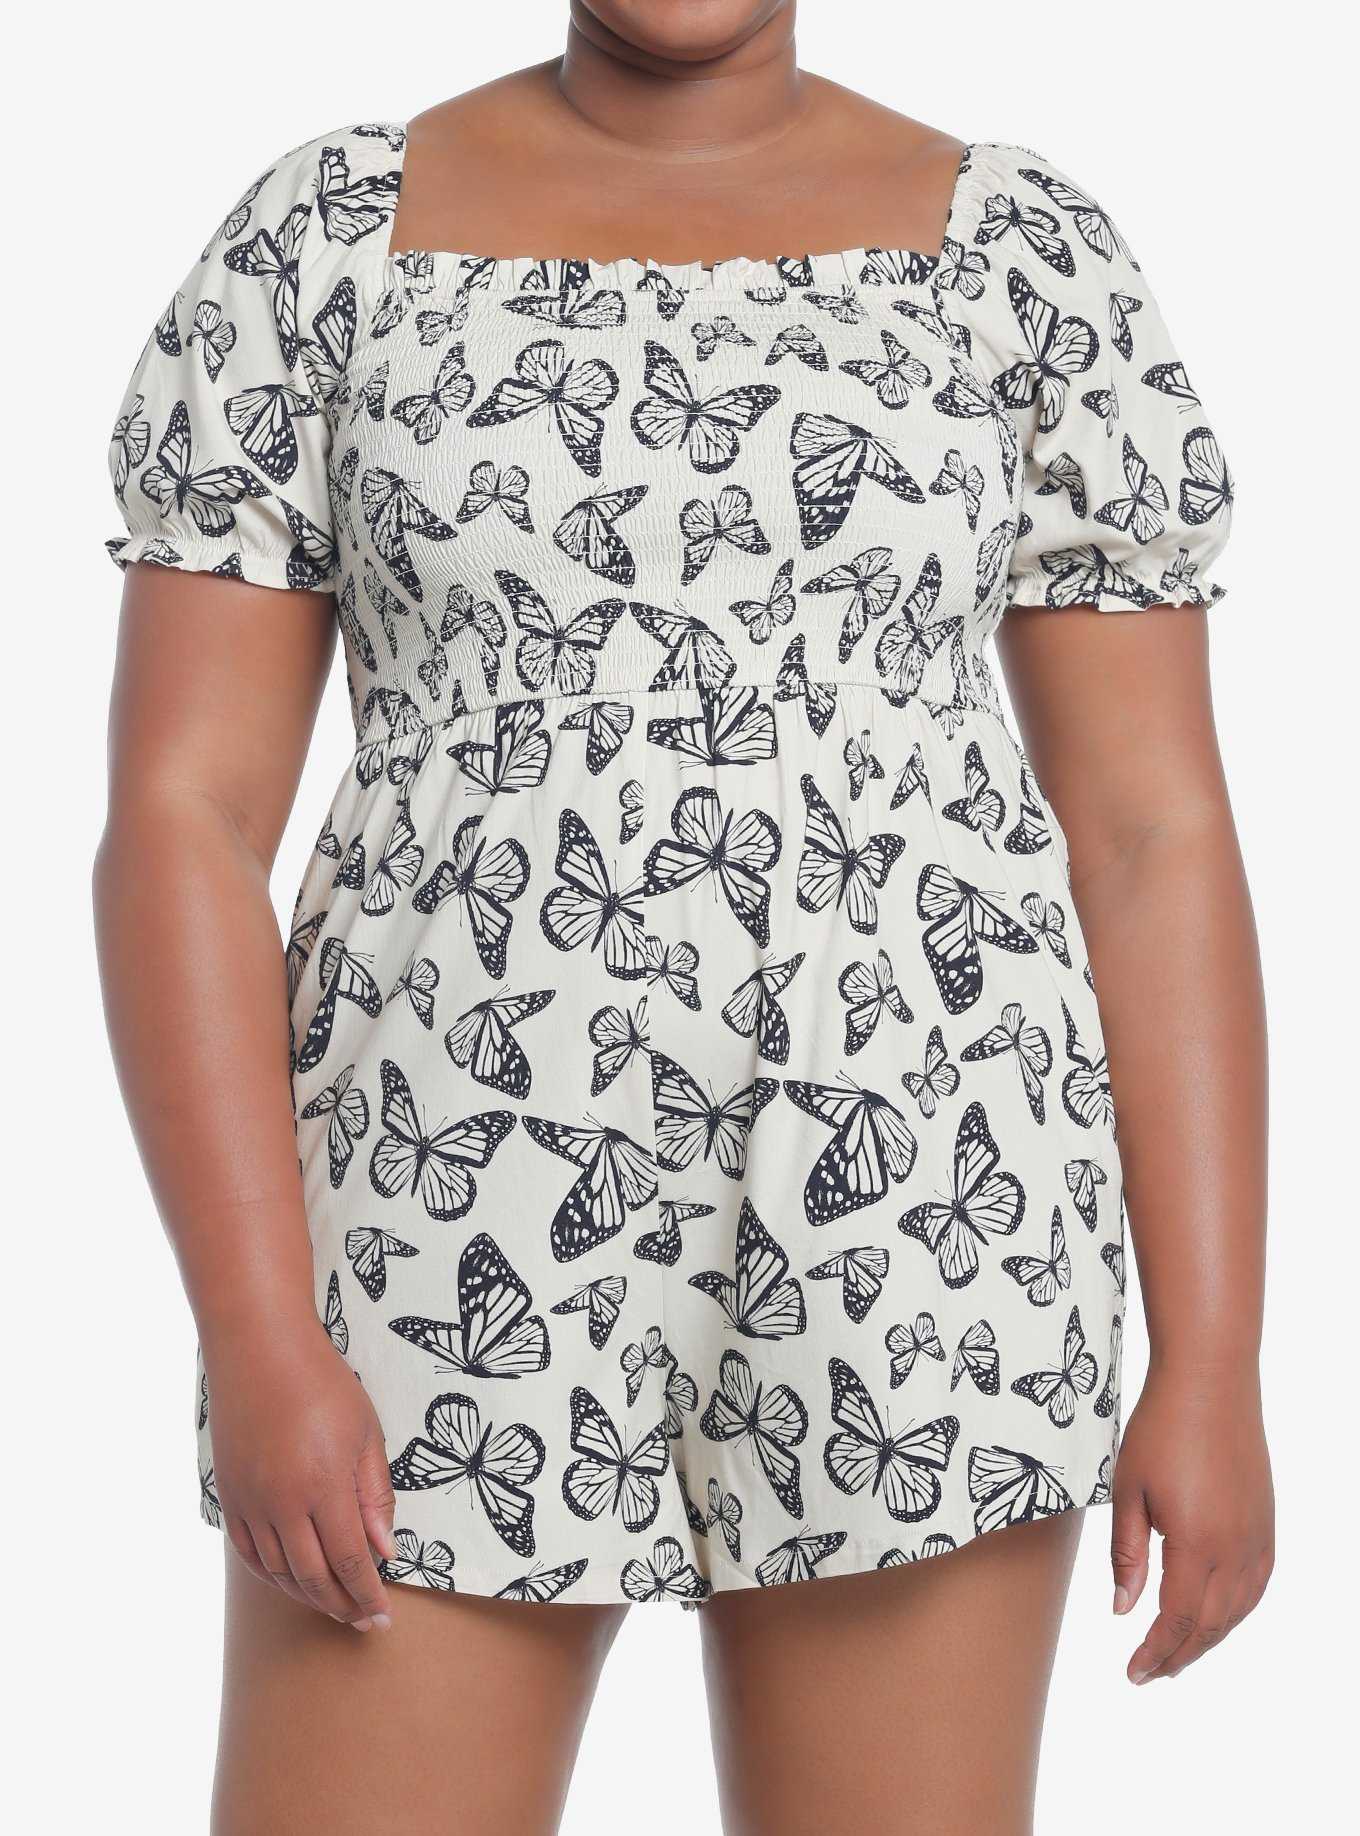 Ivory Butterfly Romper Plus Size, , hi-res